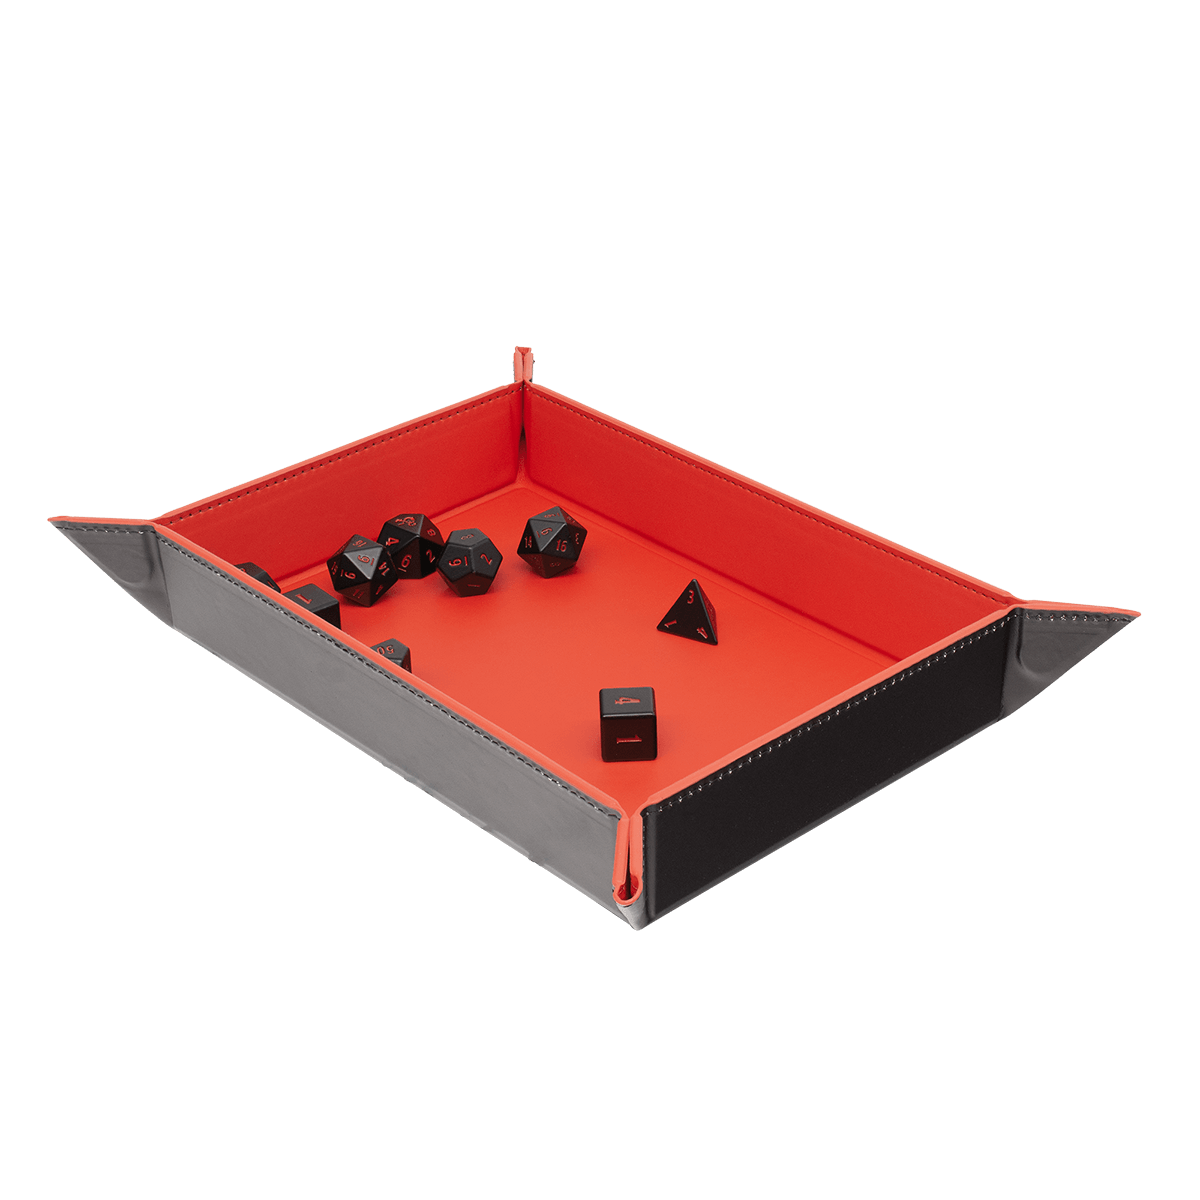 Honor Among Thieves Printed Leatherette Foldable Dice Tray for Dungeons & Dragons - Bards & Cards